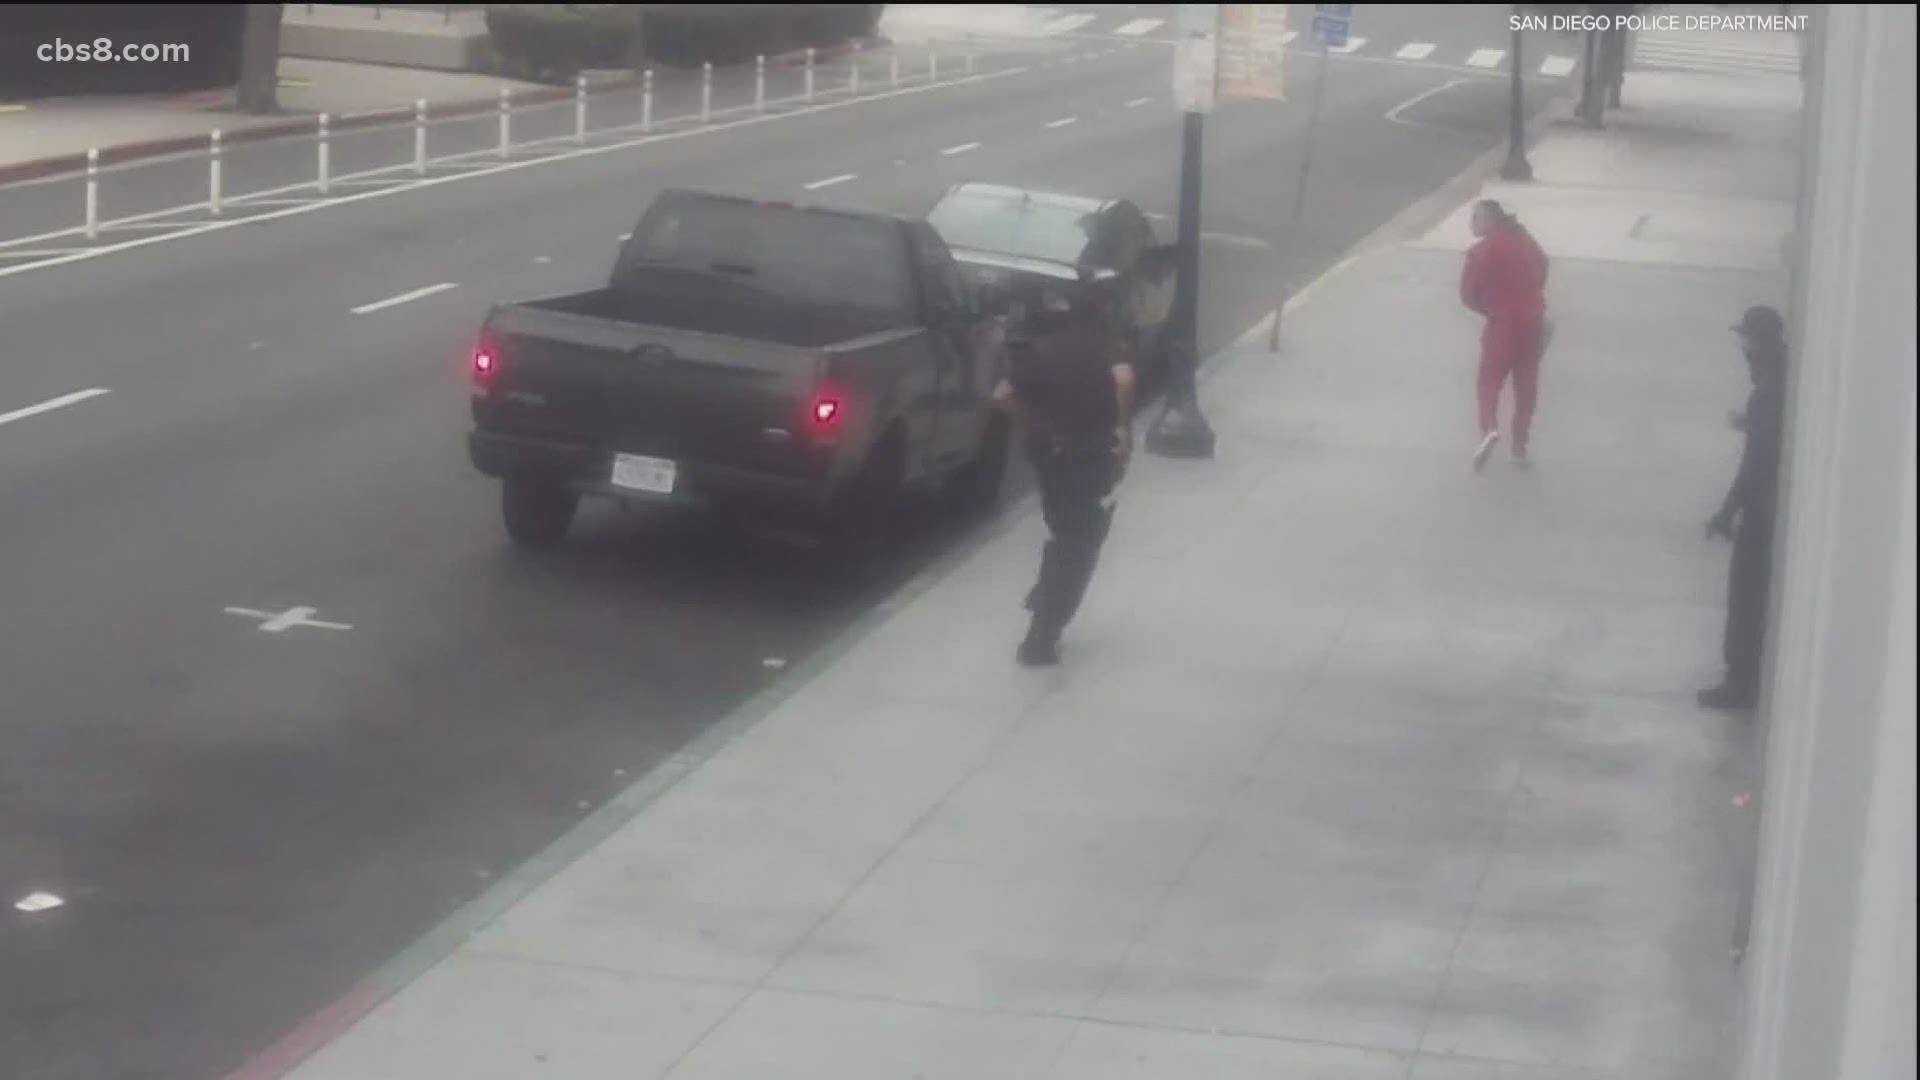 Some activists have praised the timely release of footage from an officer-involved shooting that took place in downtown San Diego Saturday evening.